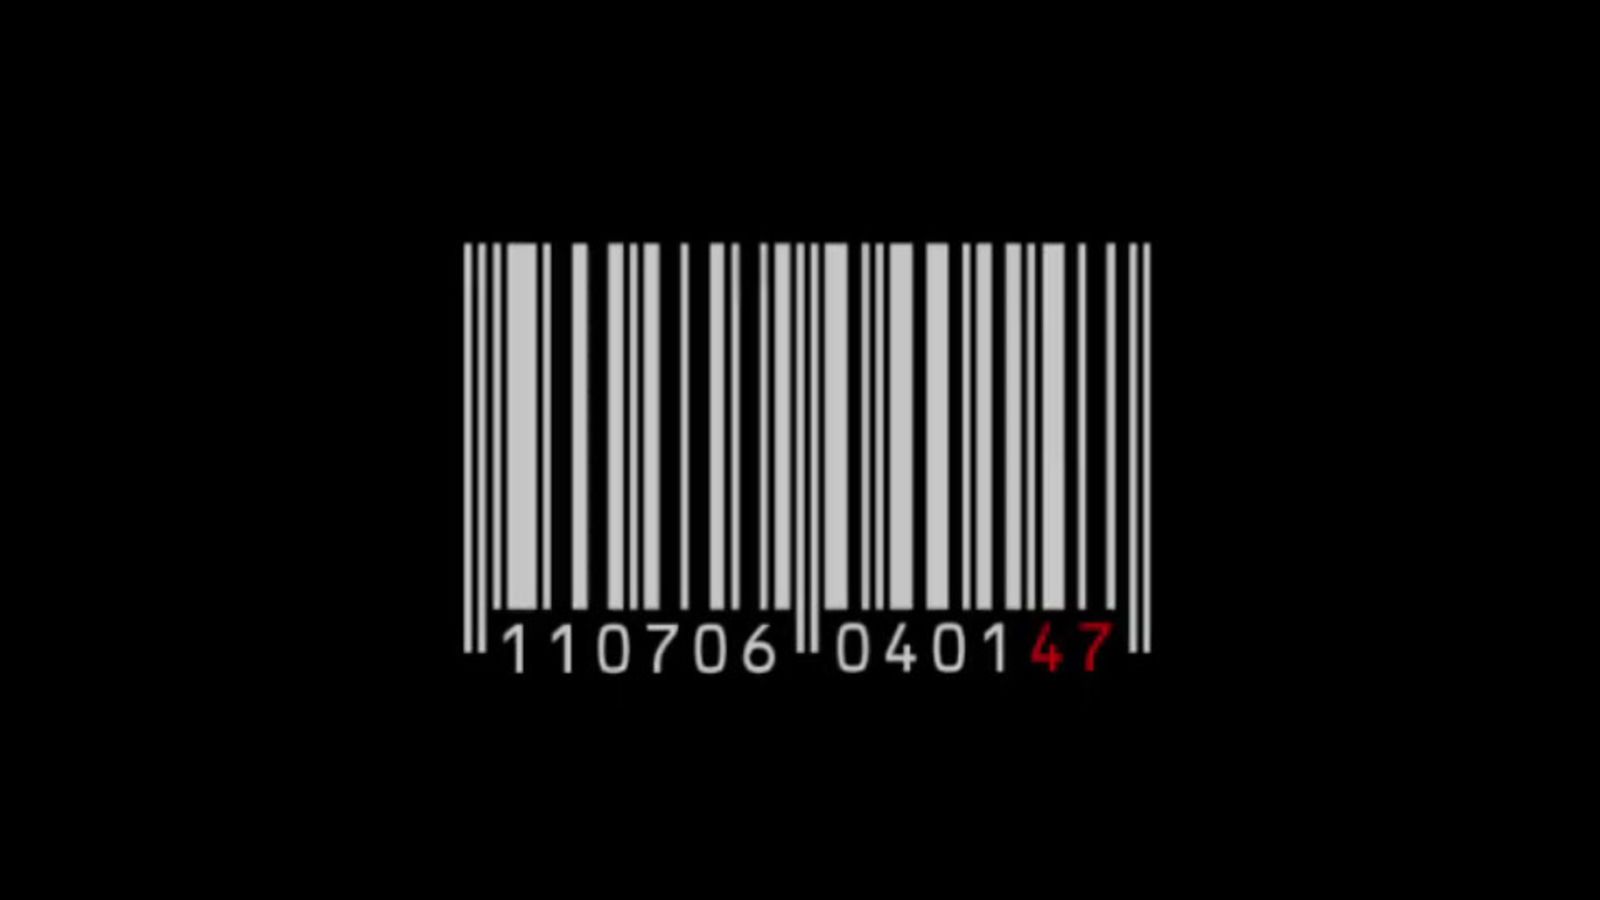 47's barcode has meaning